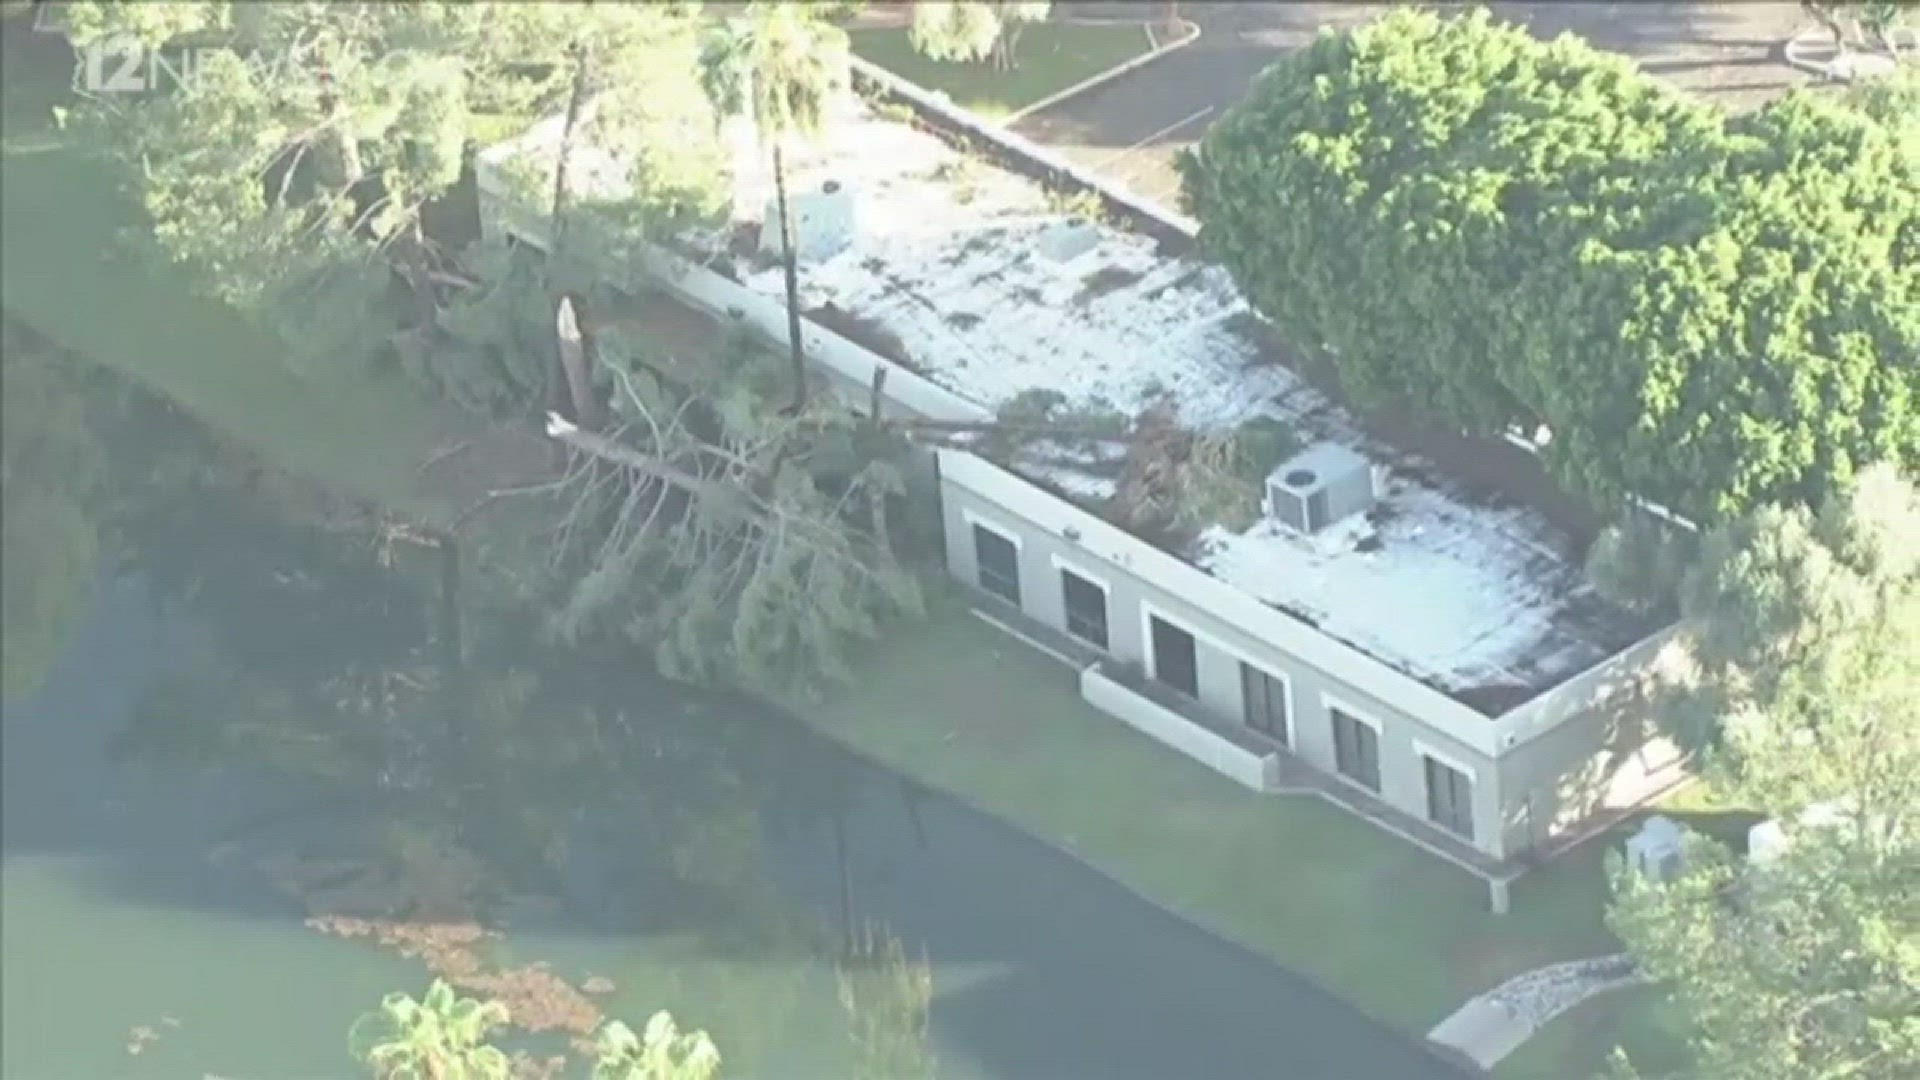 Sky 12 captured footage the aftermath following monsoon storms that ripped through Valley Thursday night.